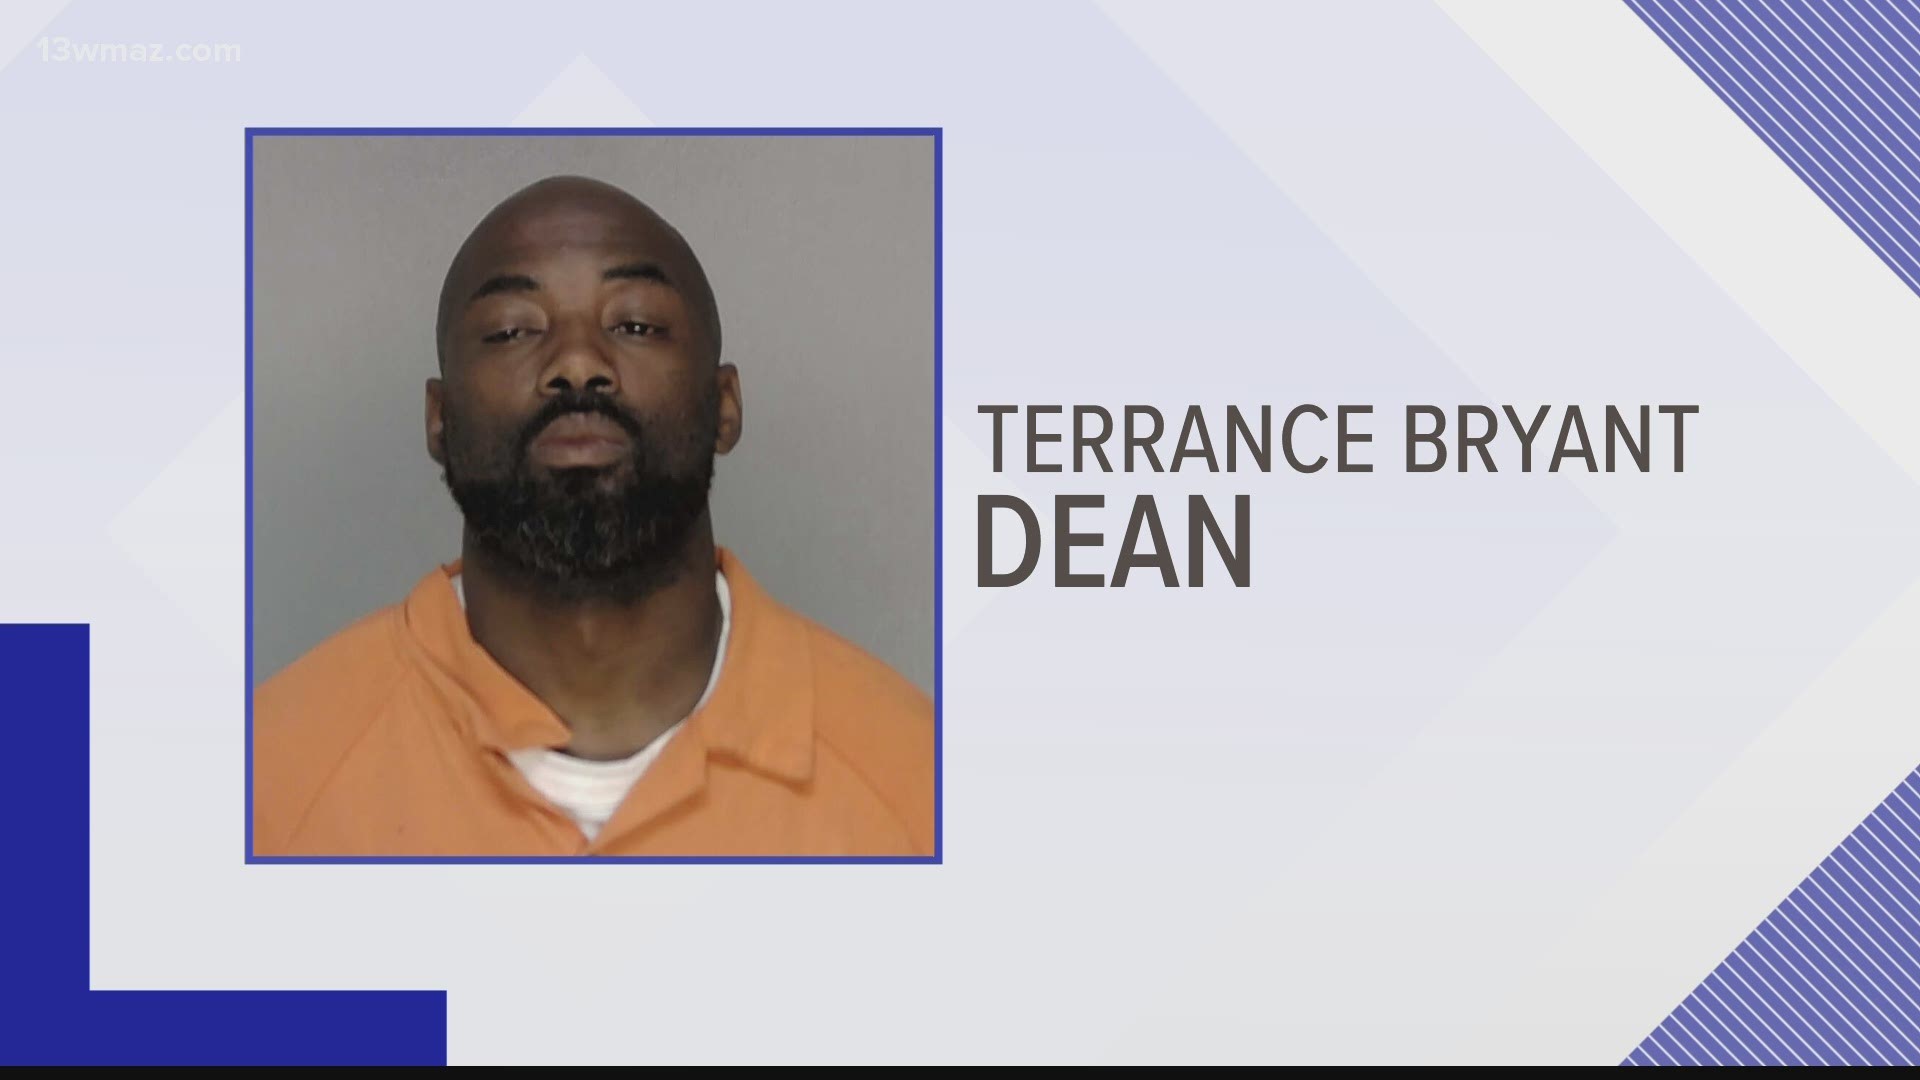 39-year-old Terrance Bryant Dean was arrested Friday in the murder of 36-year-old Michael Glover.